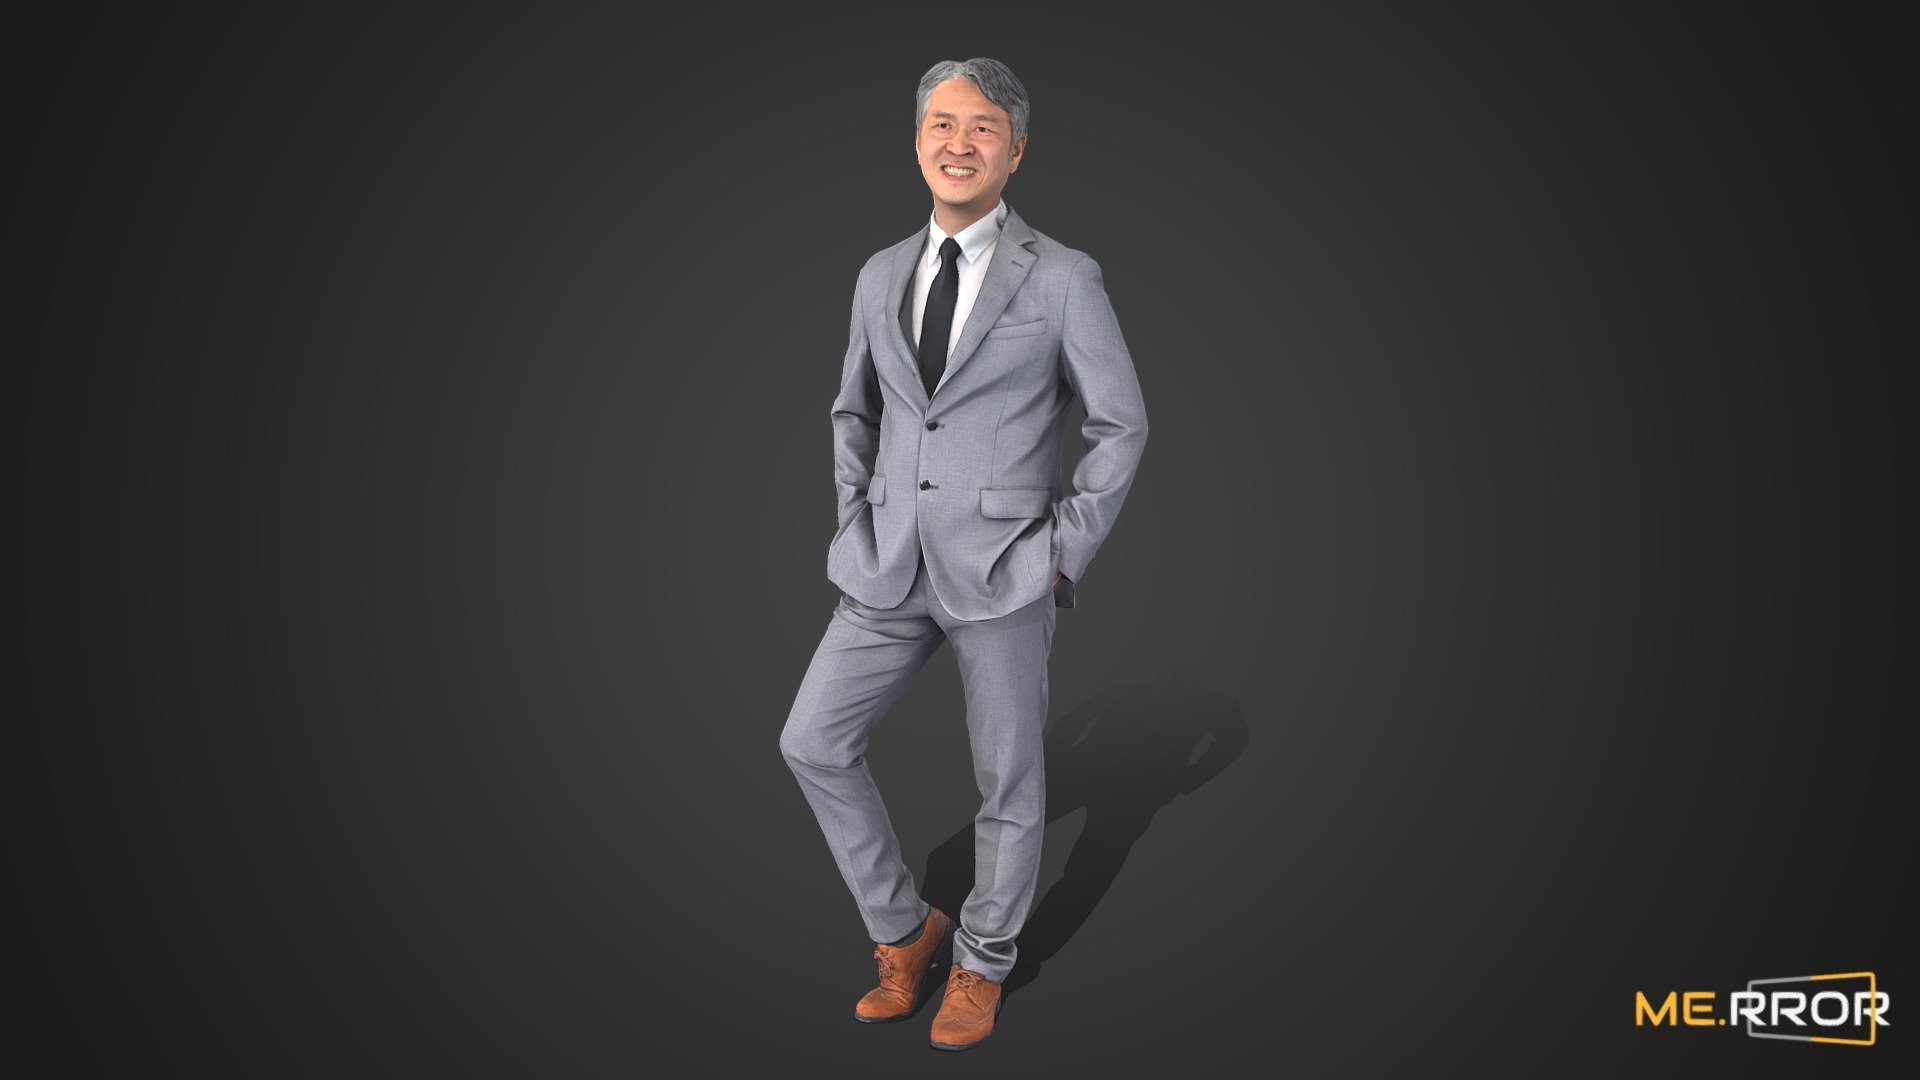 ME.RROR


From 3D models of Asian individuals to a fresh selection of free assets available each month - explore a richer diversity of photorealistic 3D assets at the ME.RROR asset store!

https://me-rror.com/store




[Model Info]




Model Formats : FBX, MAX

Texture Maps (8K) : Diffuse

You can buy this model at https://me-rror.com/asset/human/asset621




Find Scanned - 2M poly version here: https://sketchfab.com/3d-models/9f27eedc0aa24240a8a4e344a5aab592

Find the topologized version here : https://sketchfab.com/3d-models/fd0a902e1d7b4baebd661f40f59e6ece

If you encounter any problems using this model, please feel free to contact us. We'd be glad to help you.



[About ME.RROR]

Step into the future with ME.RROR, South Korea's leading 3D specialist. Bespoke creations are not just possible; they are our specialty.

Service areas:




3D scanning

3D modeling

Virtual human creation

Inquiries: https://merror.channel.io/lounge - Asian Man Scan_Posed 2 30k poly - 3D model by ME.RROR Studio (@merror) 3d model